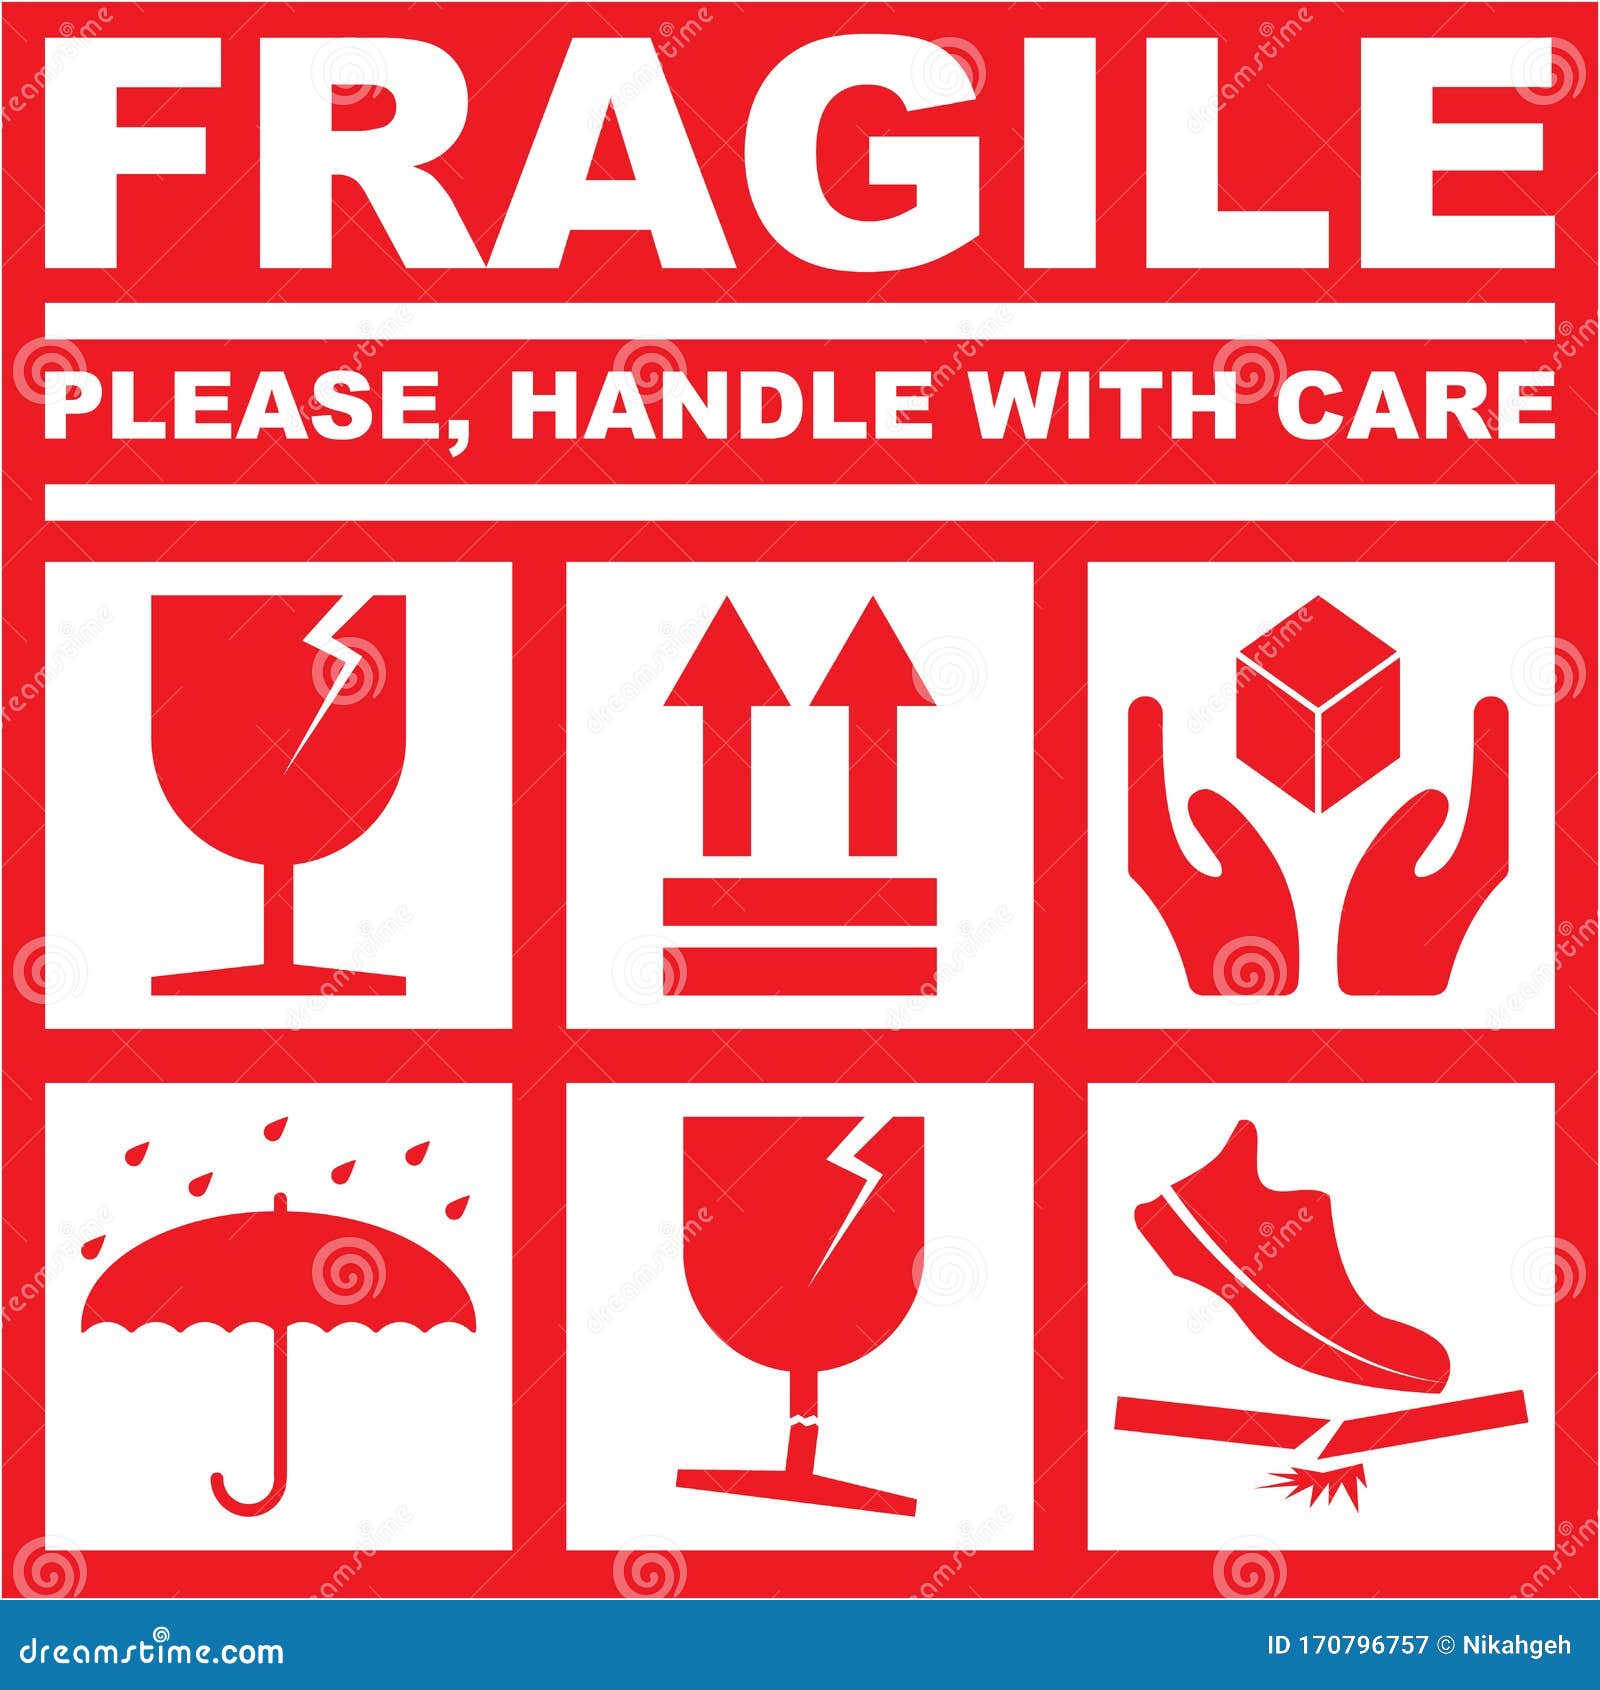 Handle with care sign black packaging sticker Vector Image